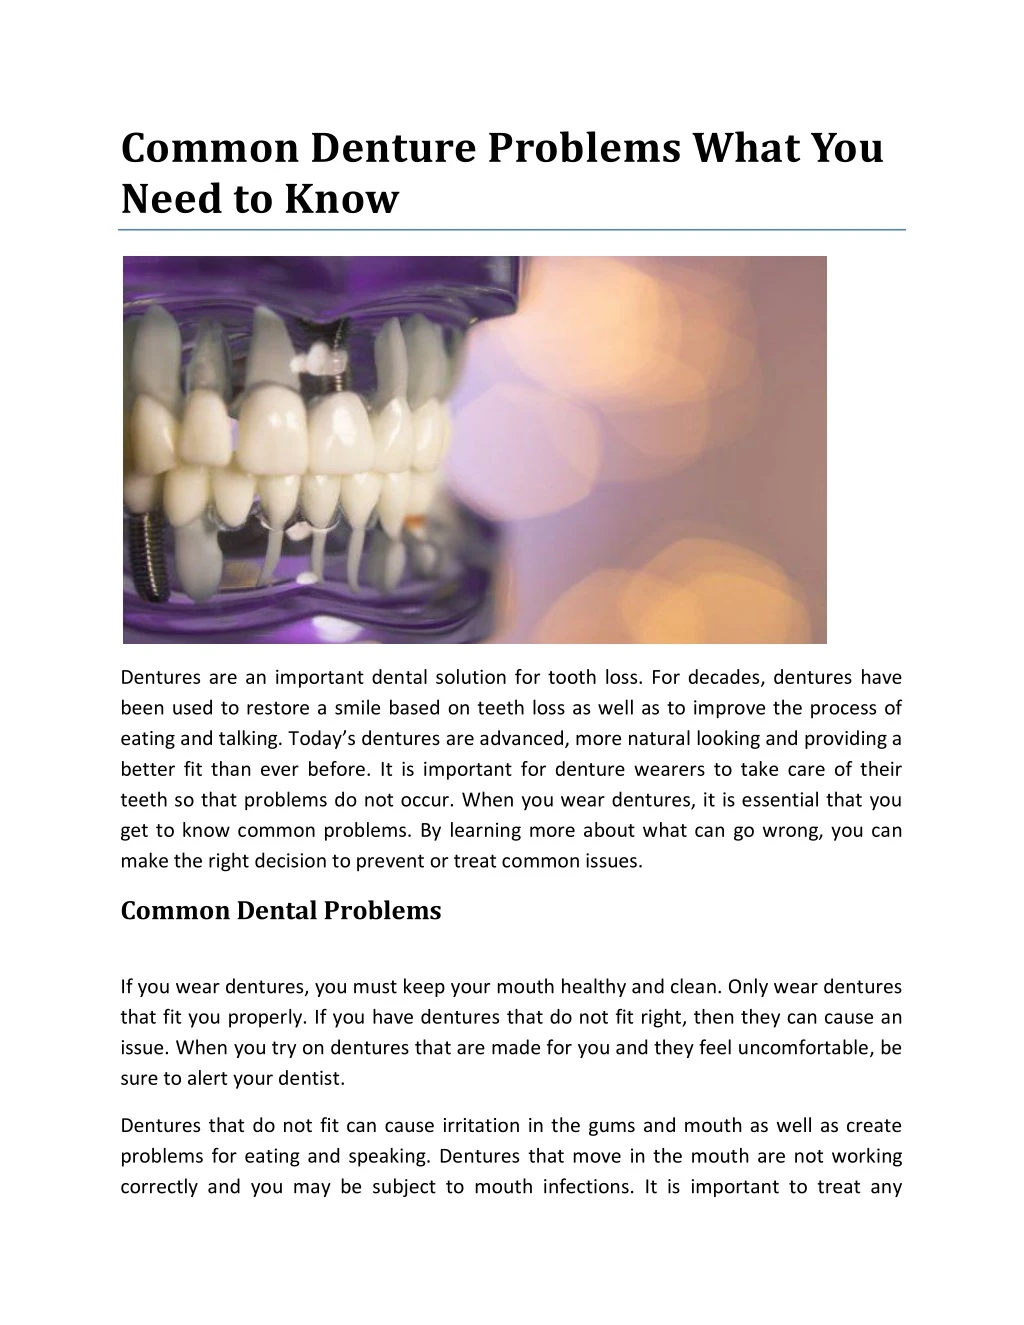 common denture problems what you need to know